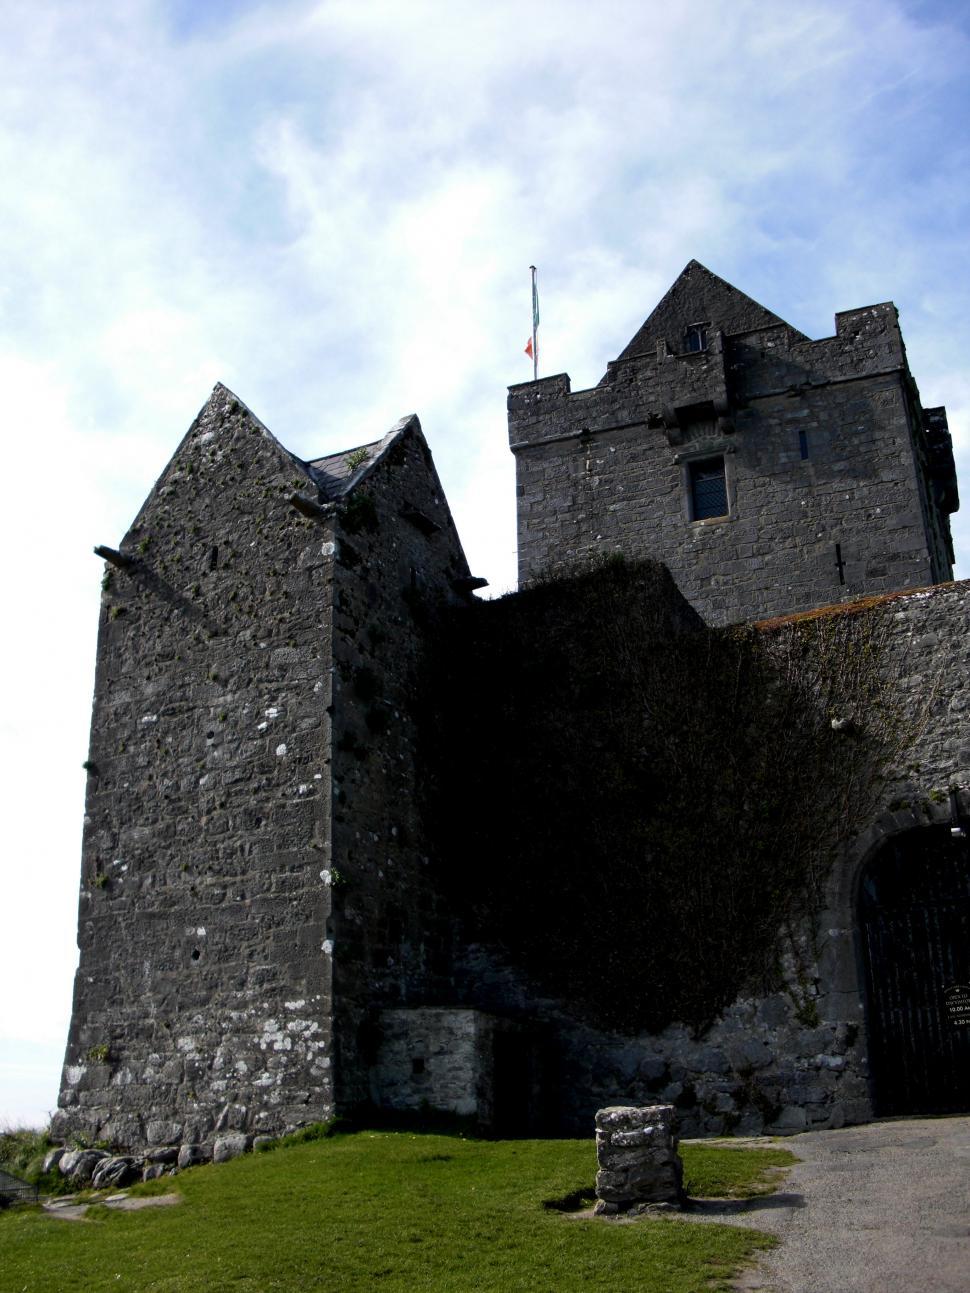 Free Image of Old Castle With Gate on Grassy Hill 